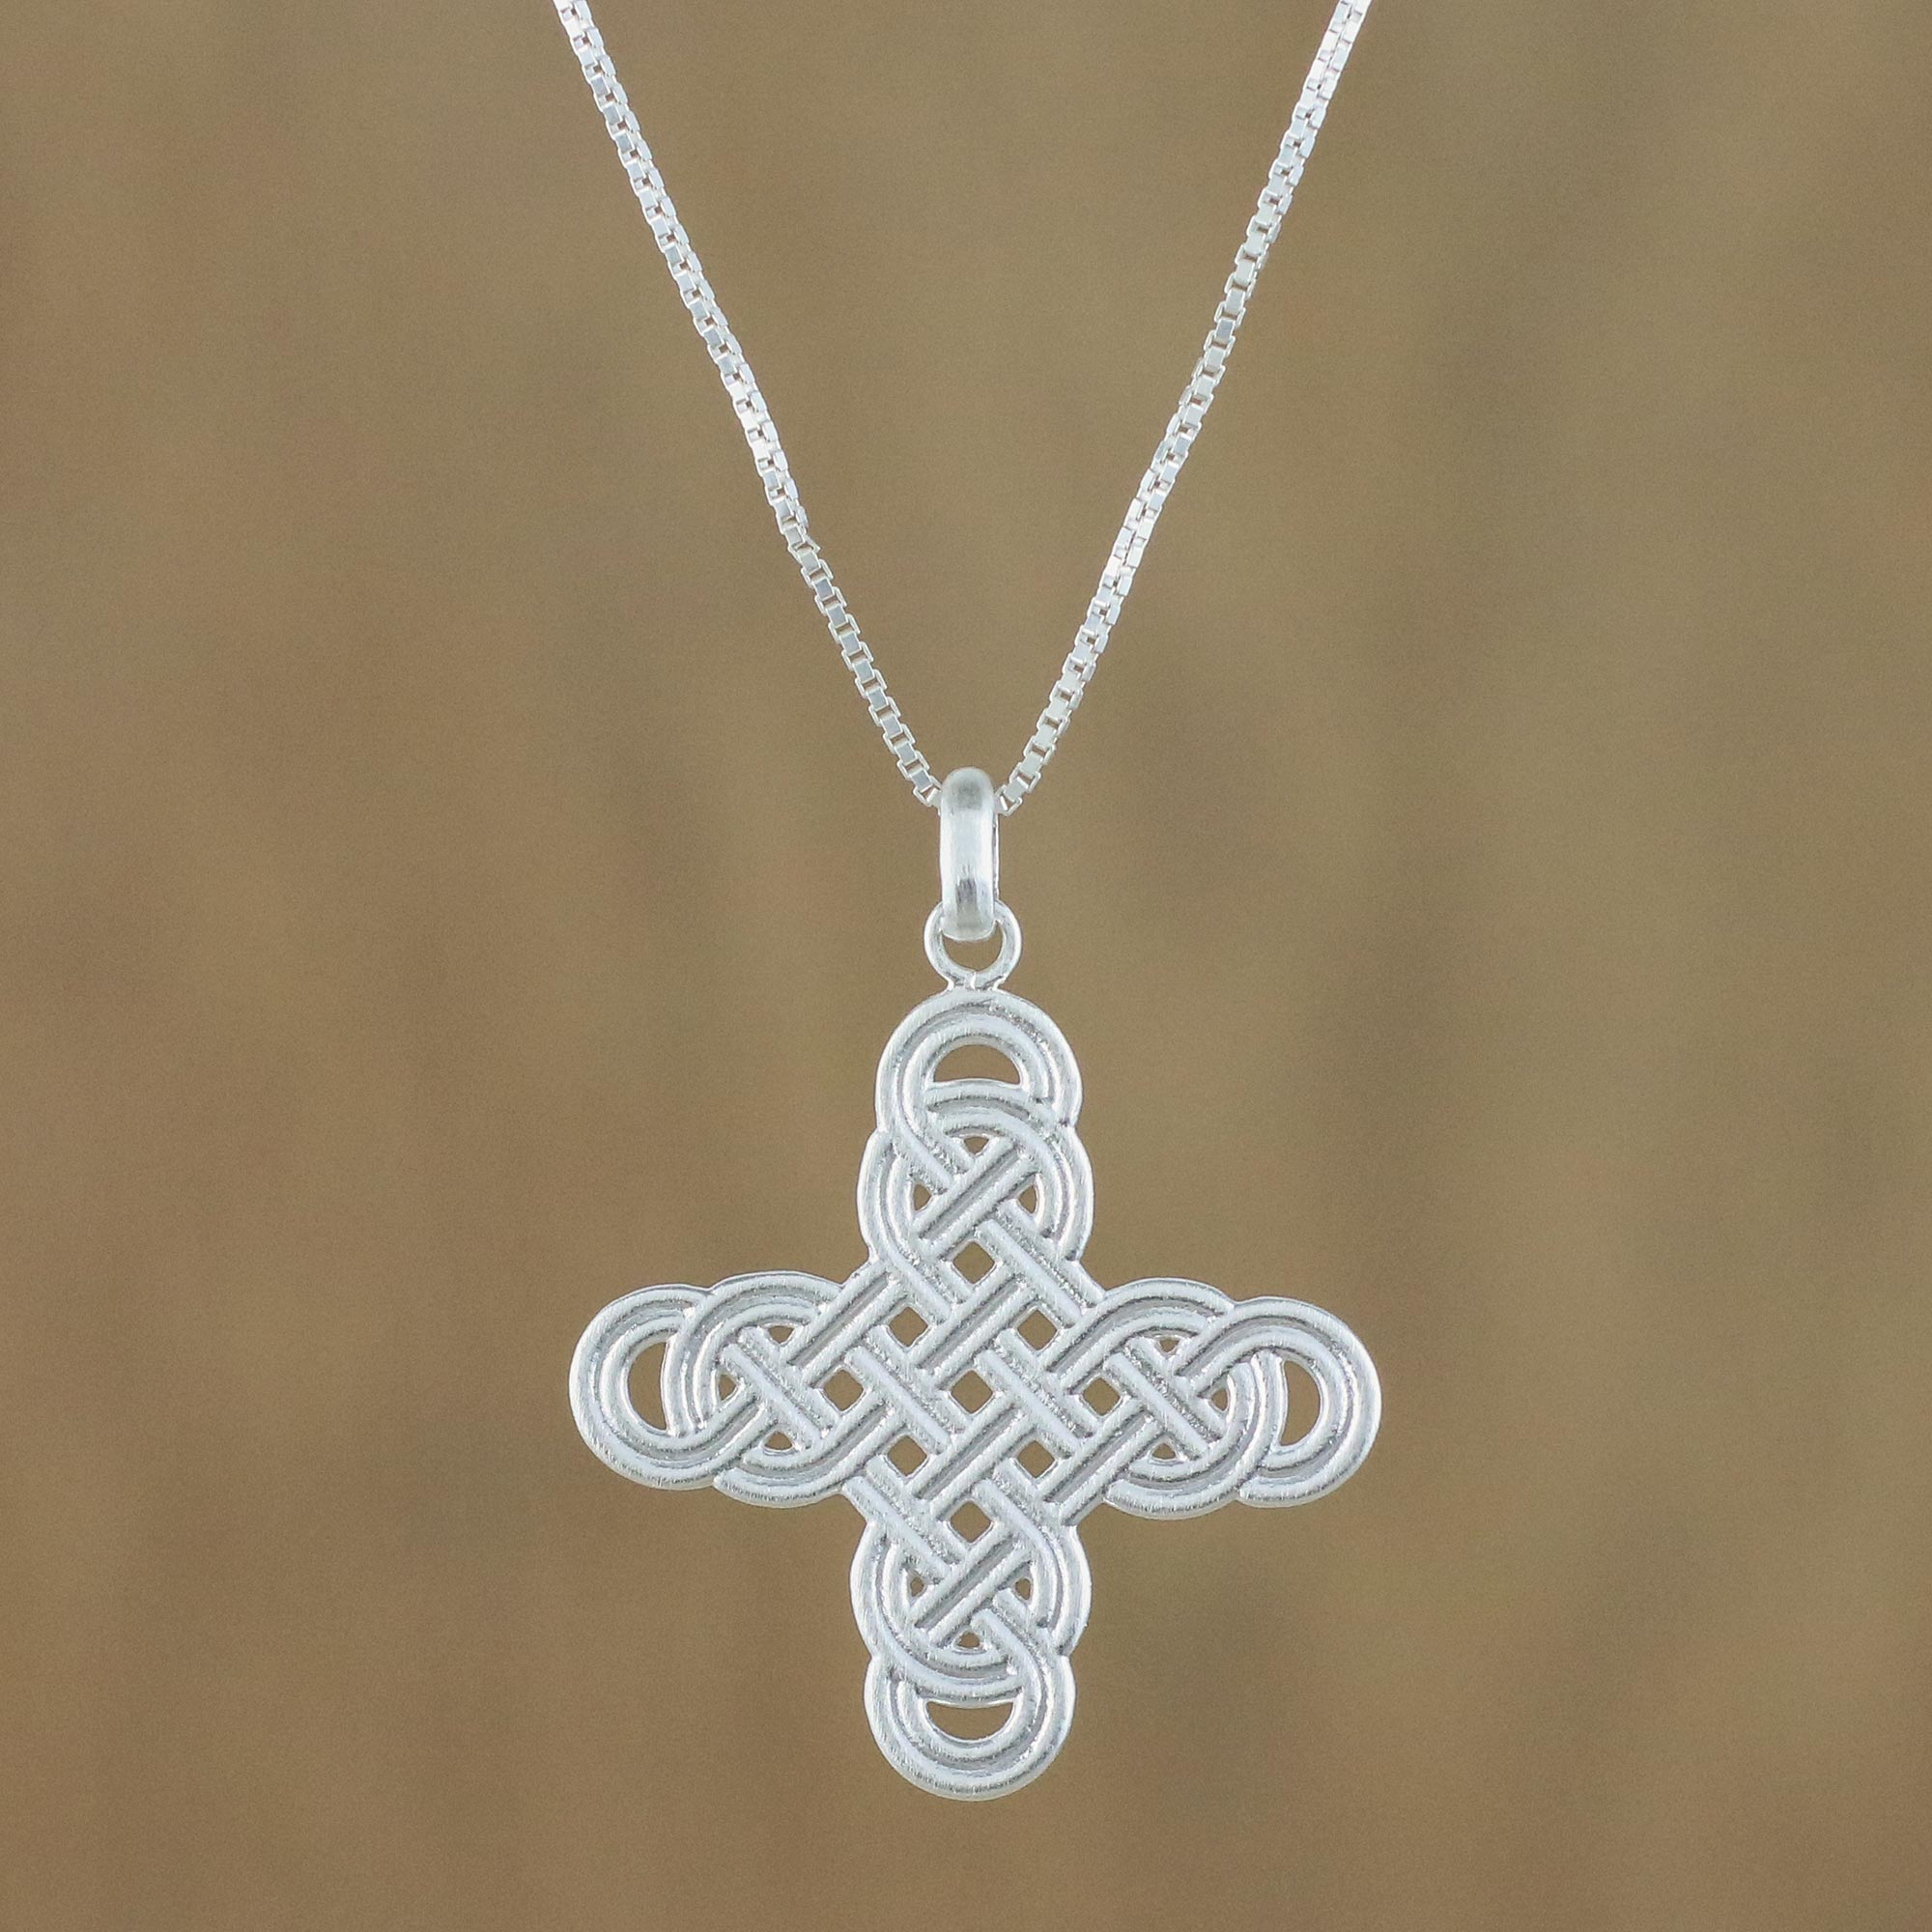 NOVICA .925 Sterling Silver and Garnet Cross Pendant Necklace with Leather Cord 18,Balinese Cross